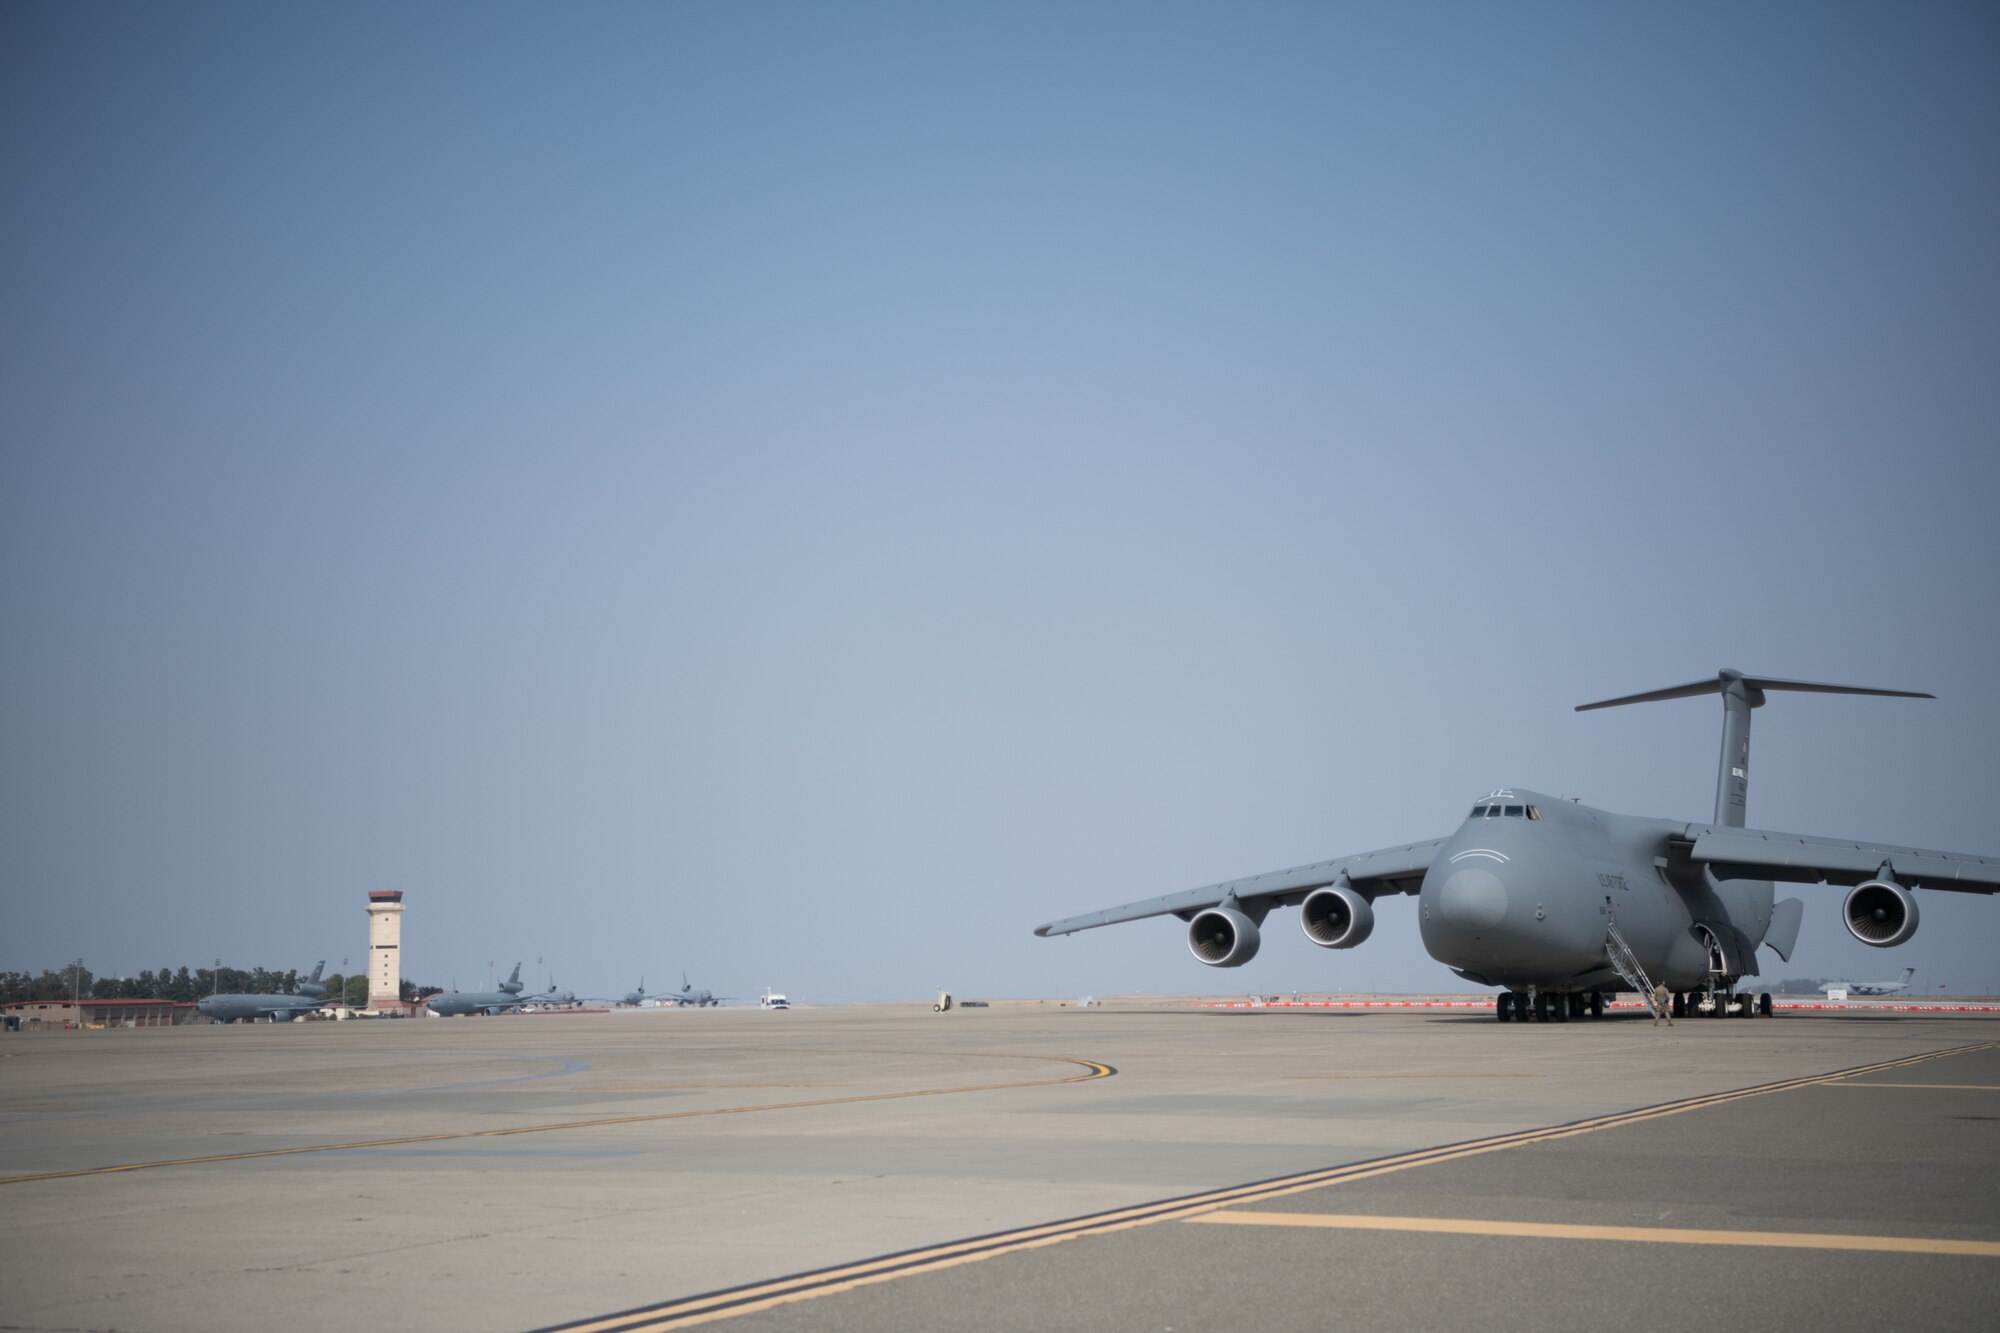 A C-5M Super Galaxy loaded with cargo, passenger seats and aircrews from the 349th Air Mobility Wing at Travis Air Force Base, California, is prepared for departure prior to a mission supporting the Afghanistan evacuation, Aug. 21, 2021. The 349th AMW is providing rapid global mobility to assist the U.S. State Department in the safe evacuation of Americans and allied civilian personnel from Afghanistan